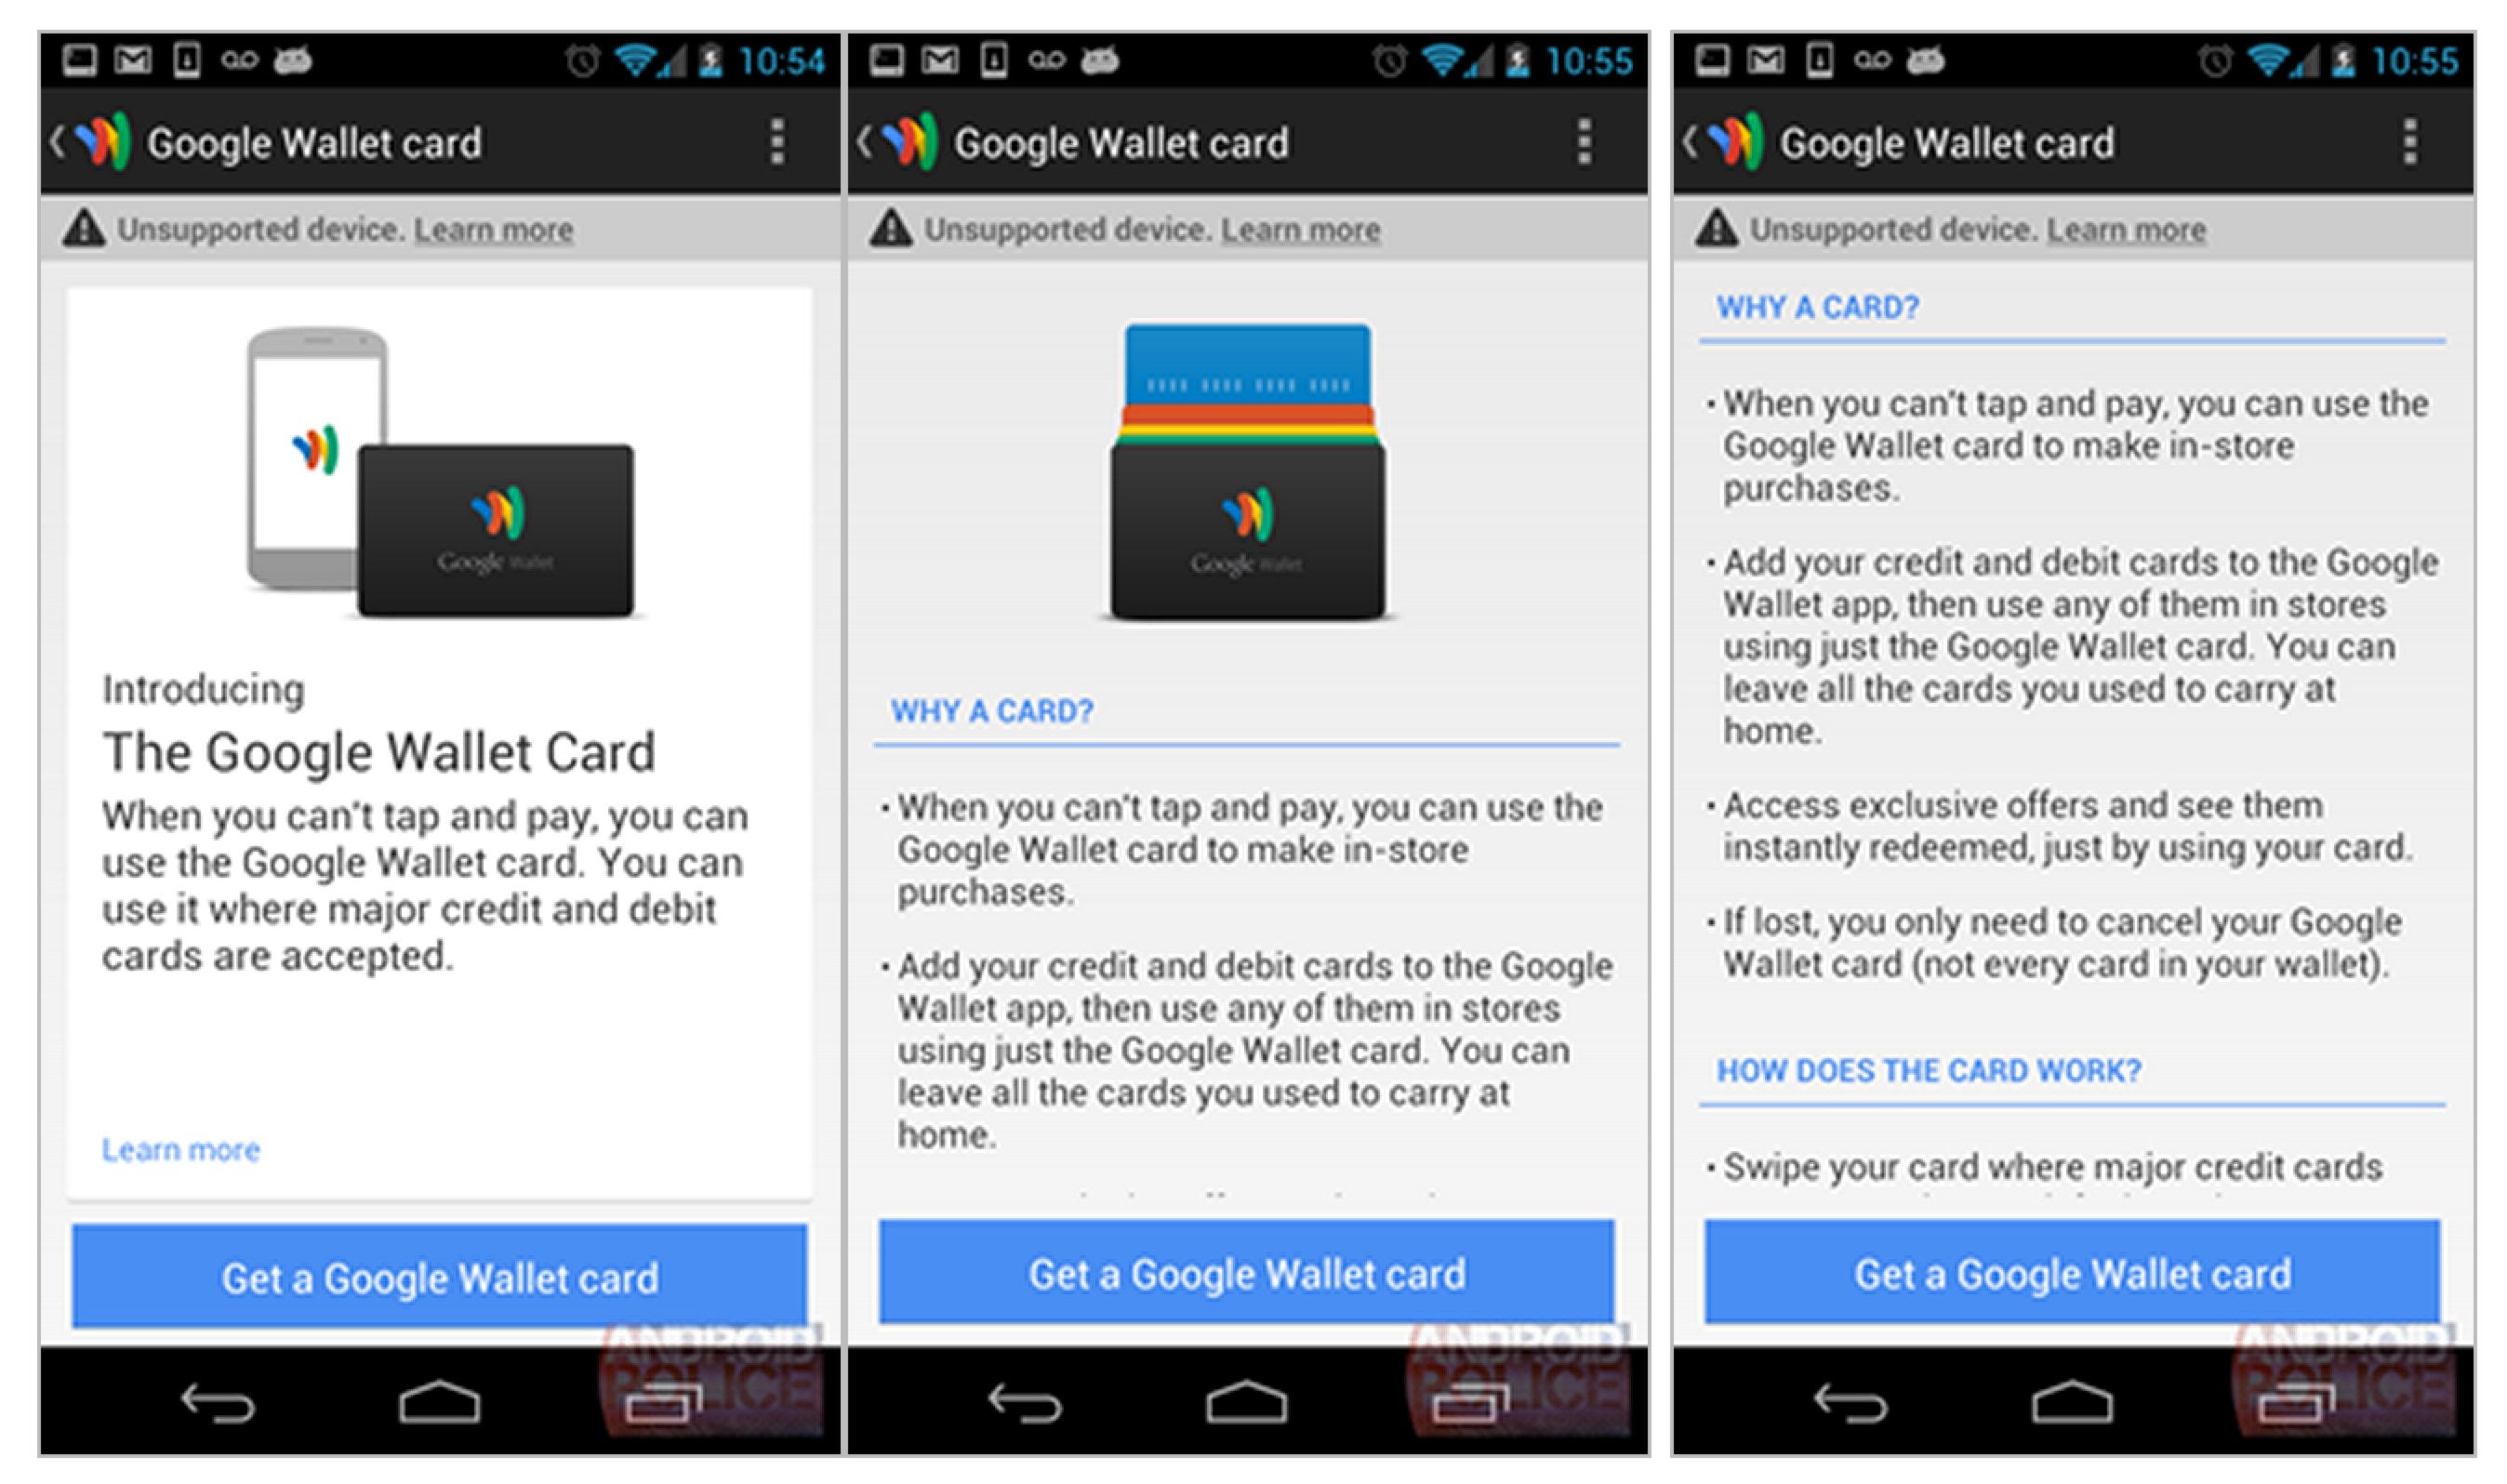 Leaked screenshots confirm the existence of a physical Google Wallet card - Google Wallet to have physical card option says Support Page